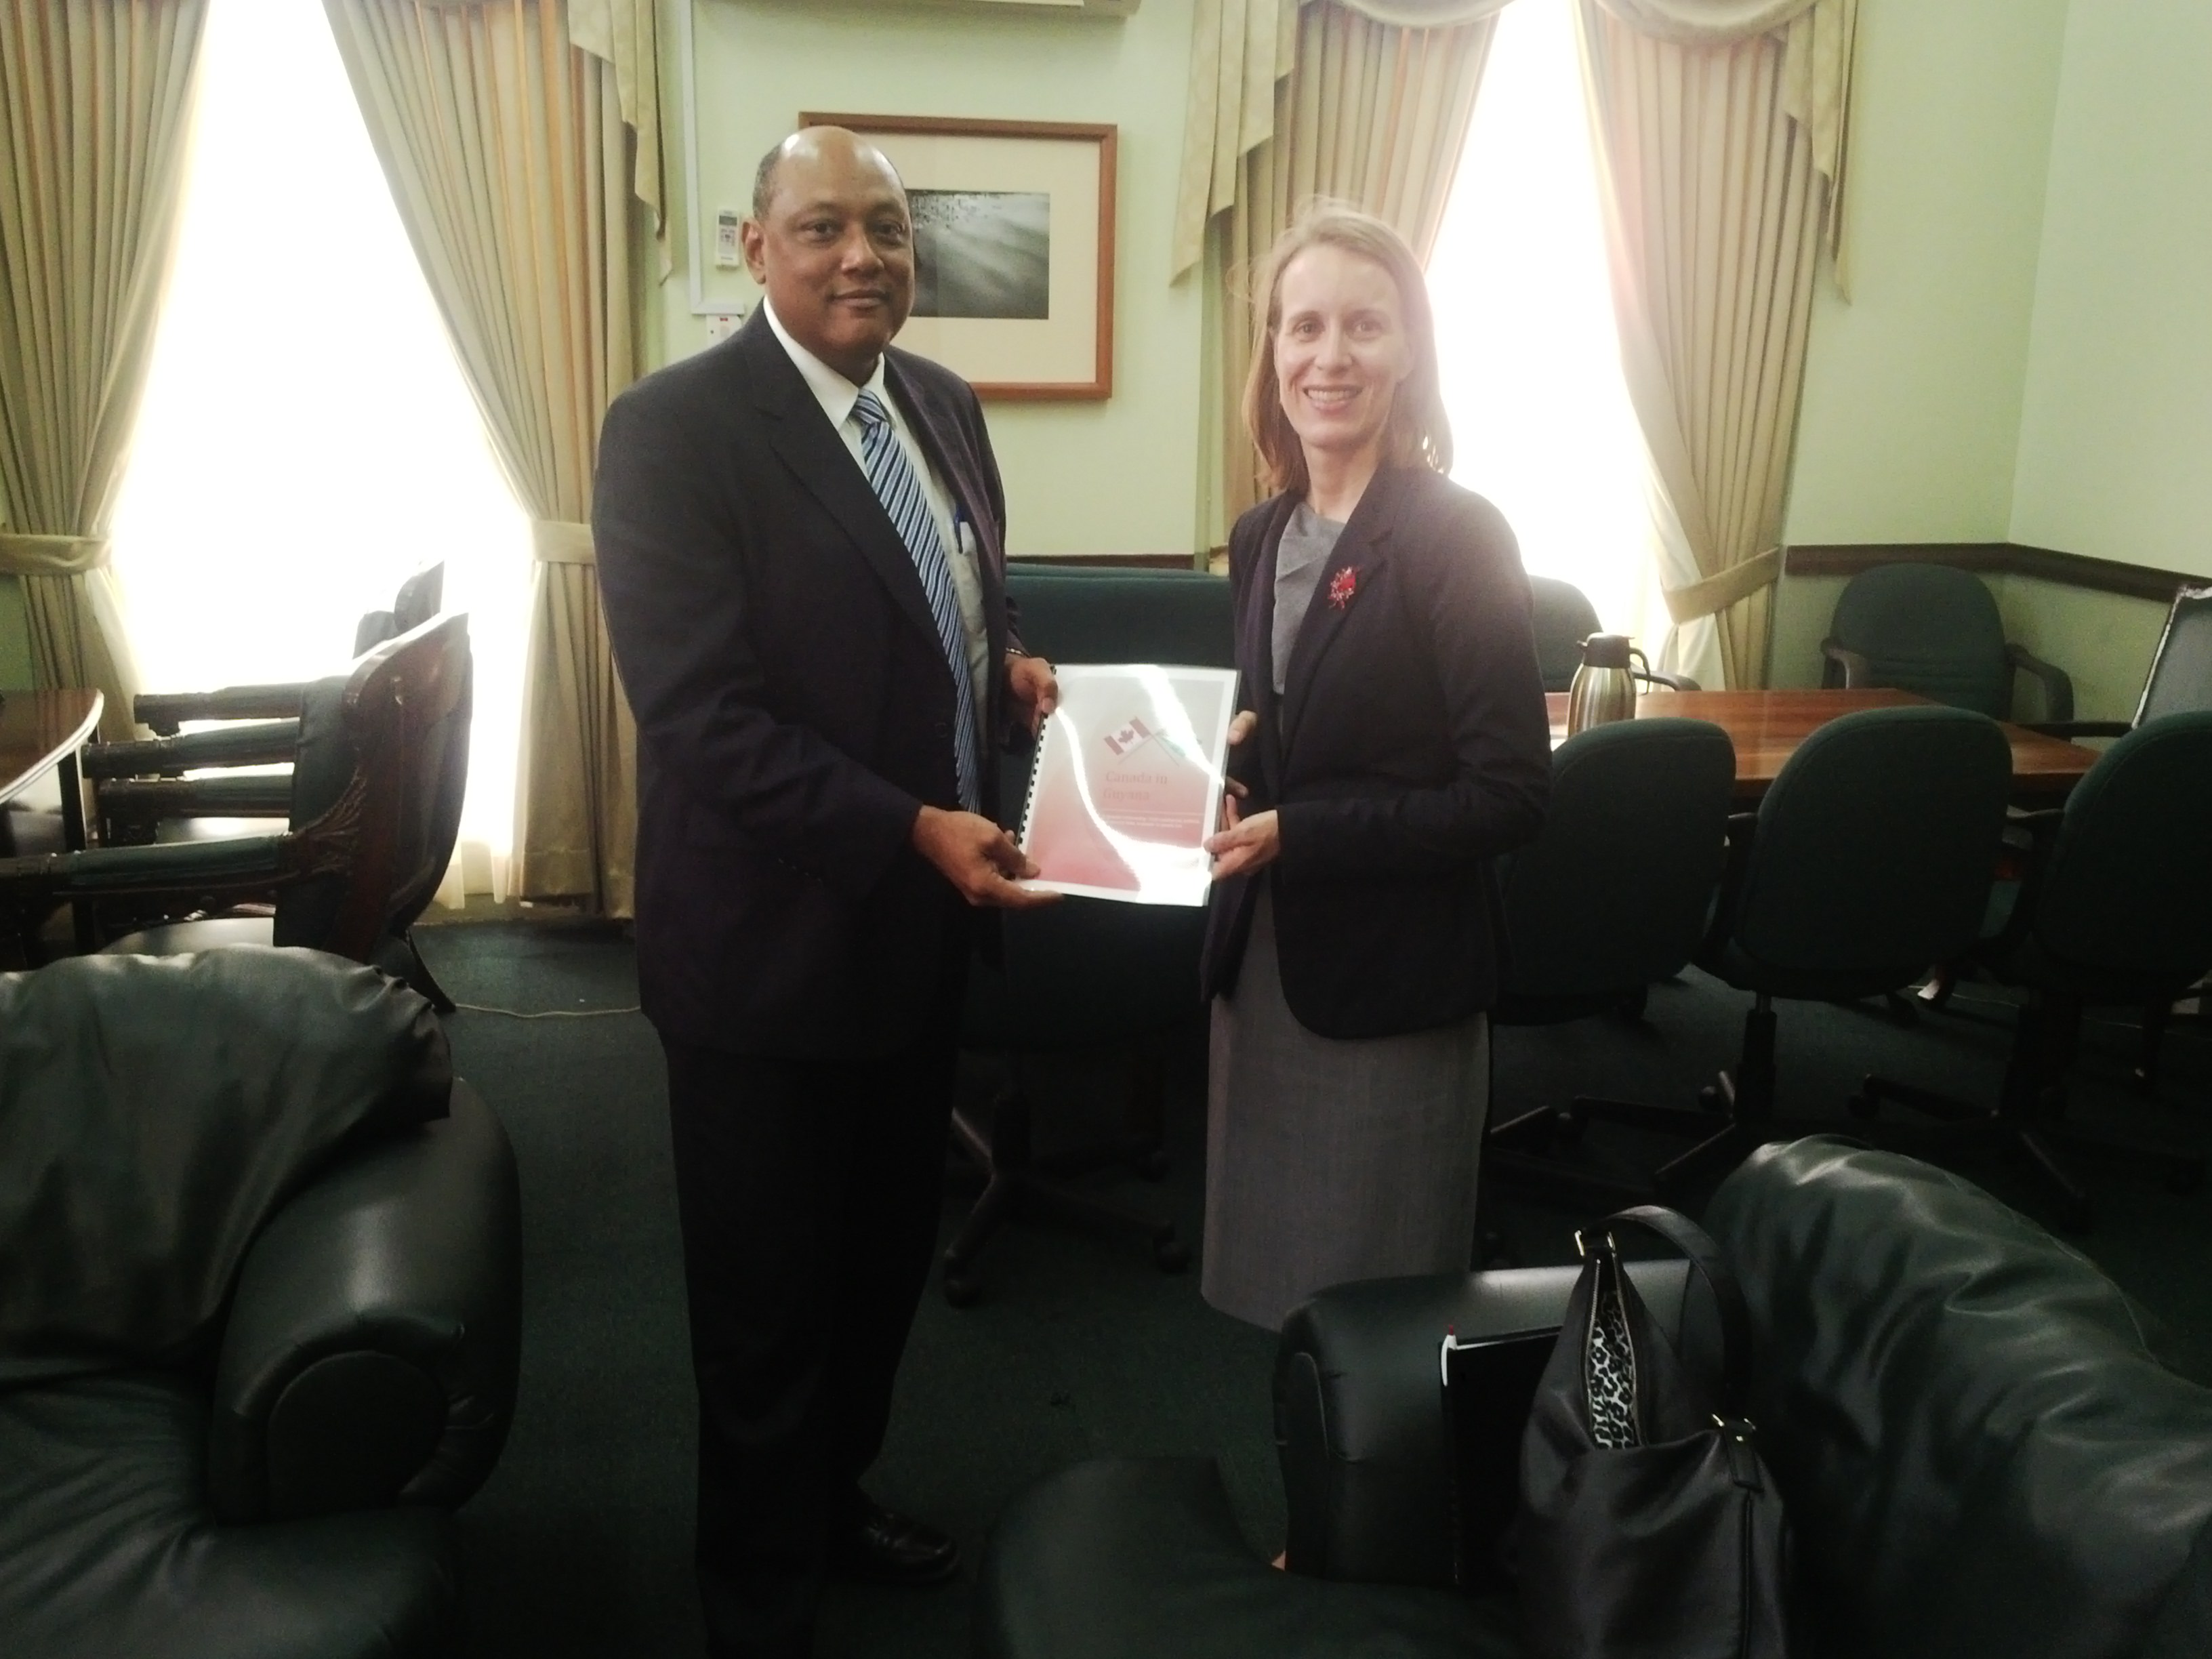 Speaker receives copy of a review of the partnership between Guyana and Canada